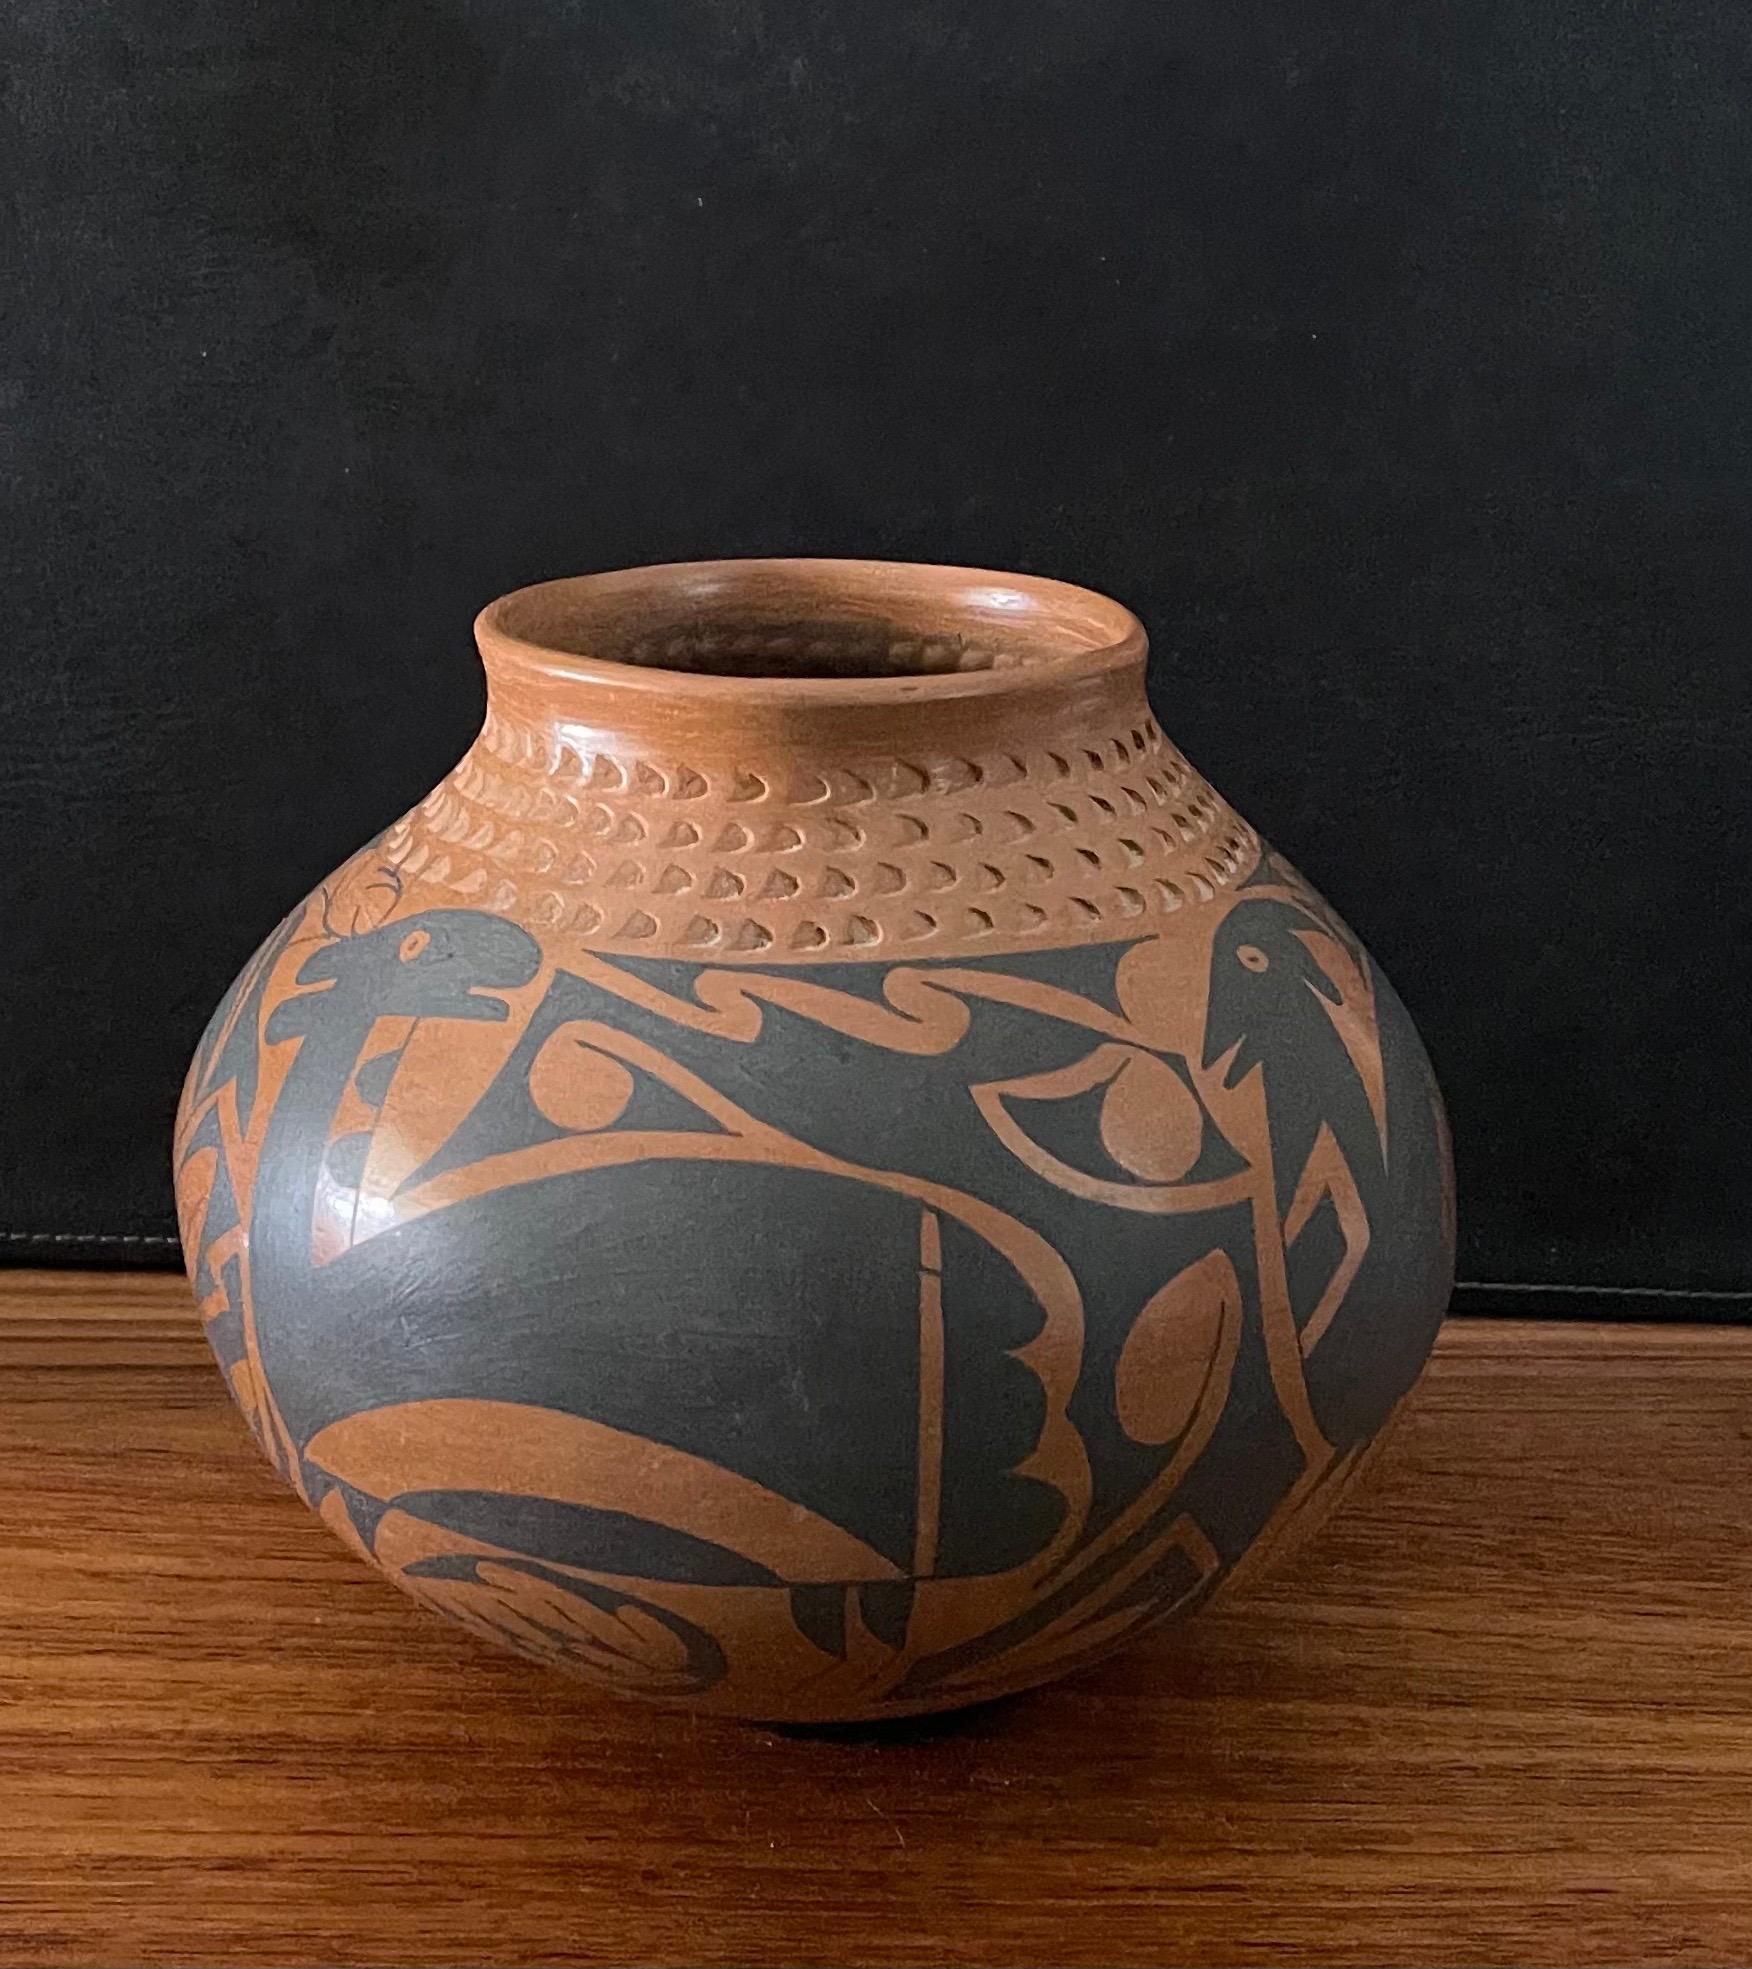 Beautiful hand-turned large Mata Ortiz polychrome pottery vessel with goat motif by Daniel Gonzales, circa 1990s. The exquisite piece made of naturally brown clay has a unique black goat design. This vase is in very good condition and measures